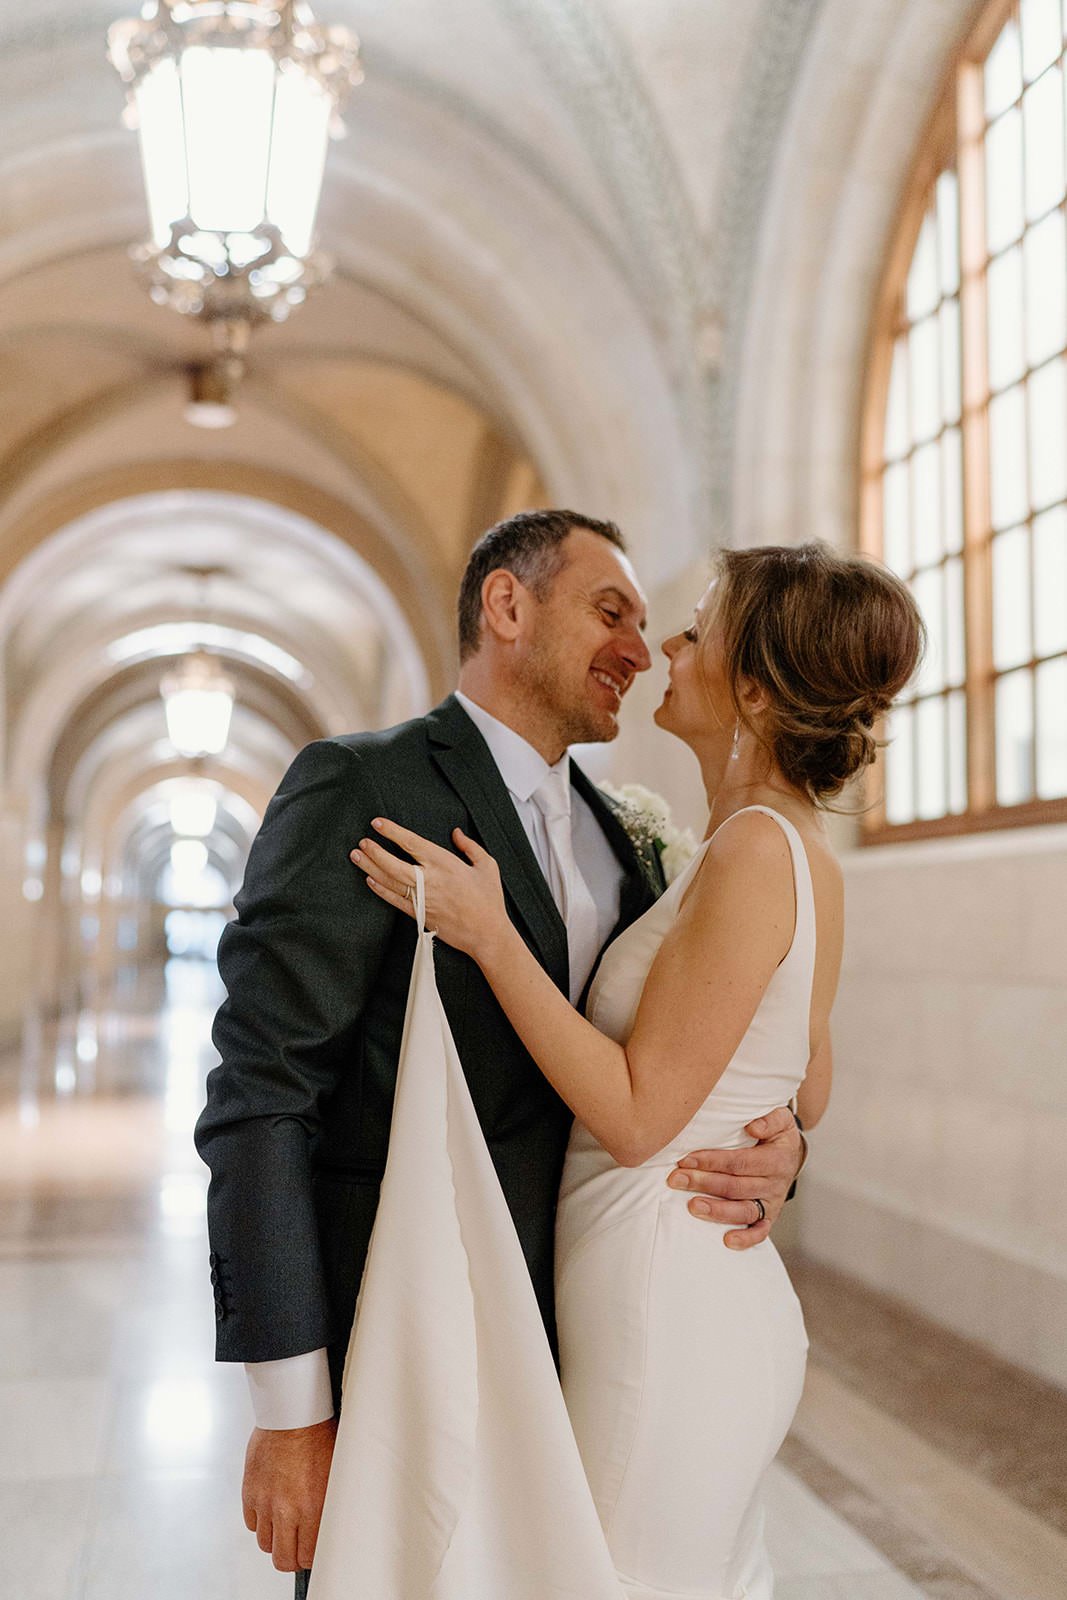 Intimate elopement at the Chicago Court House